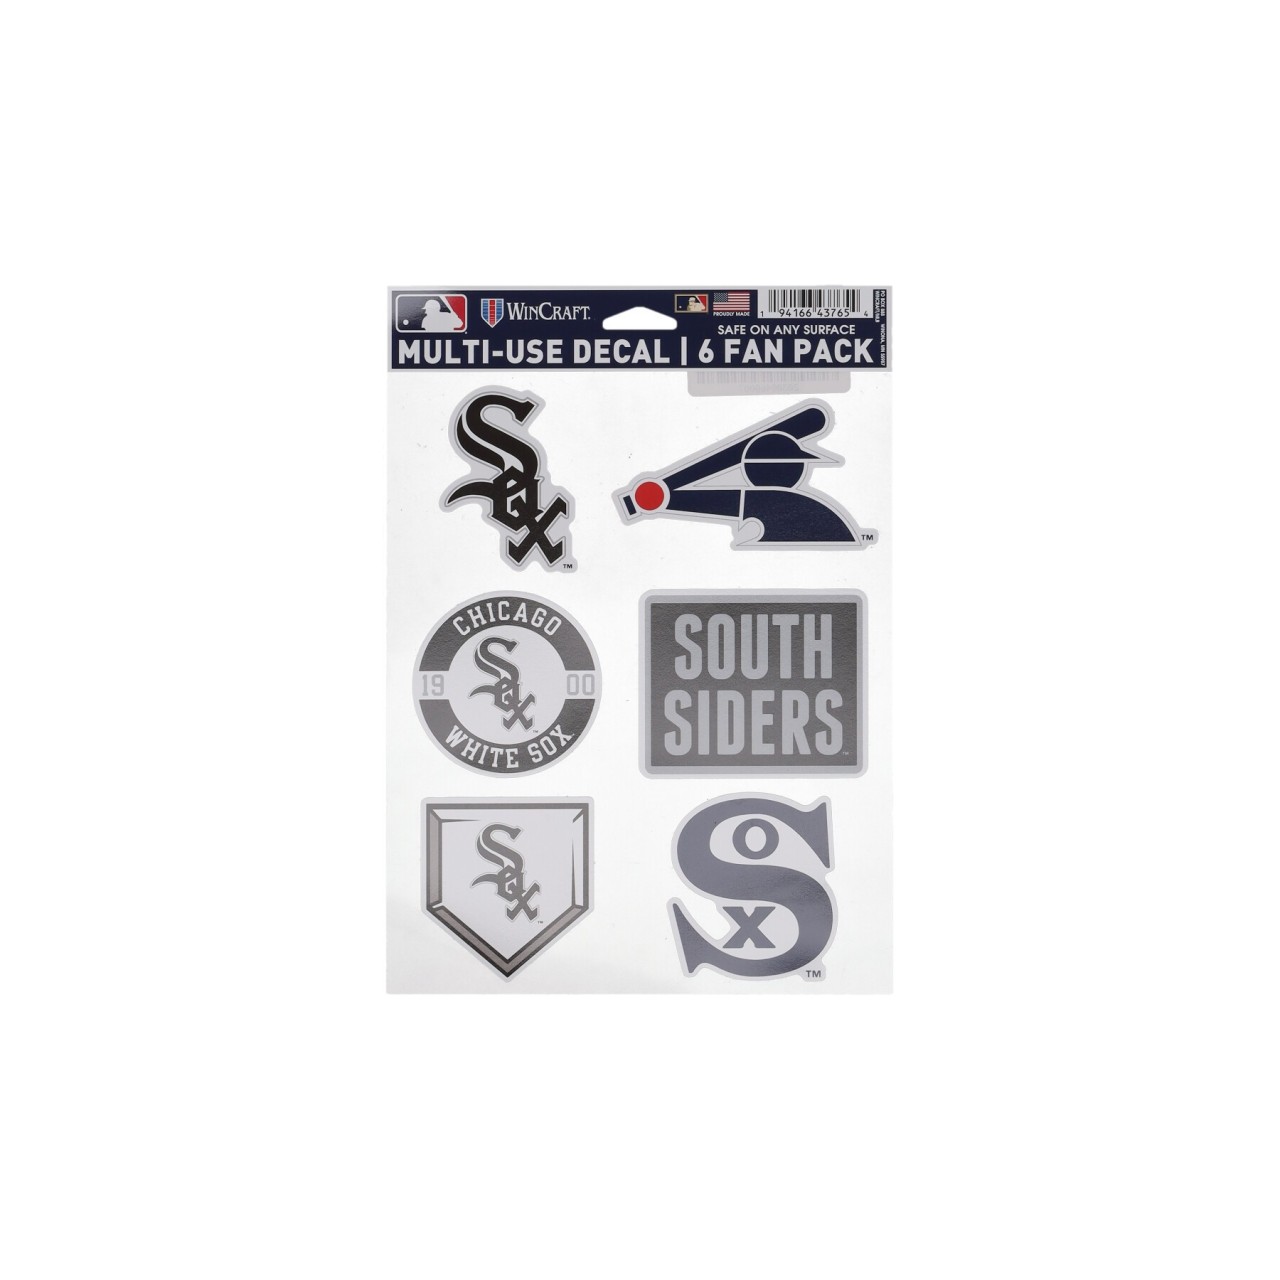 WINCRAFT MLB 5.5 x 7.75” FAN PACK DECALS CHIWHI 43765321